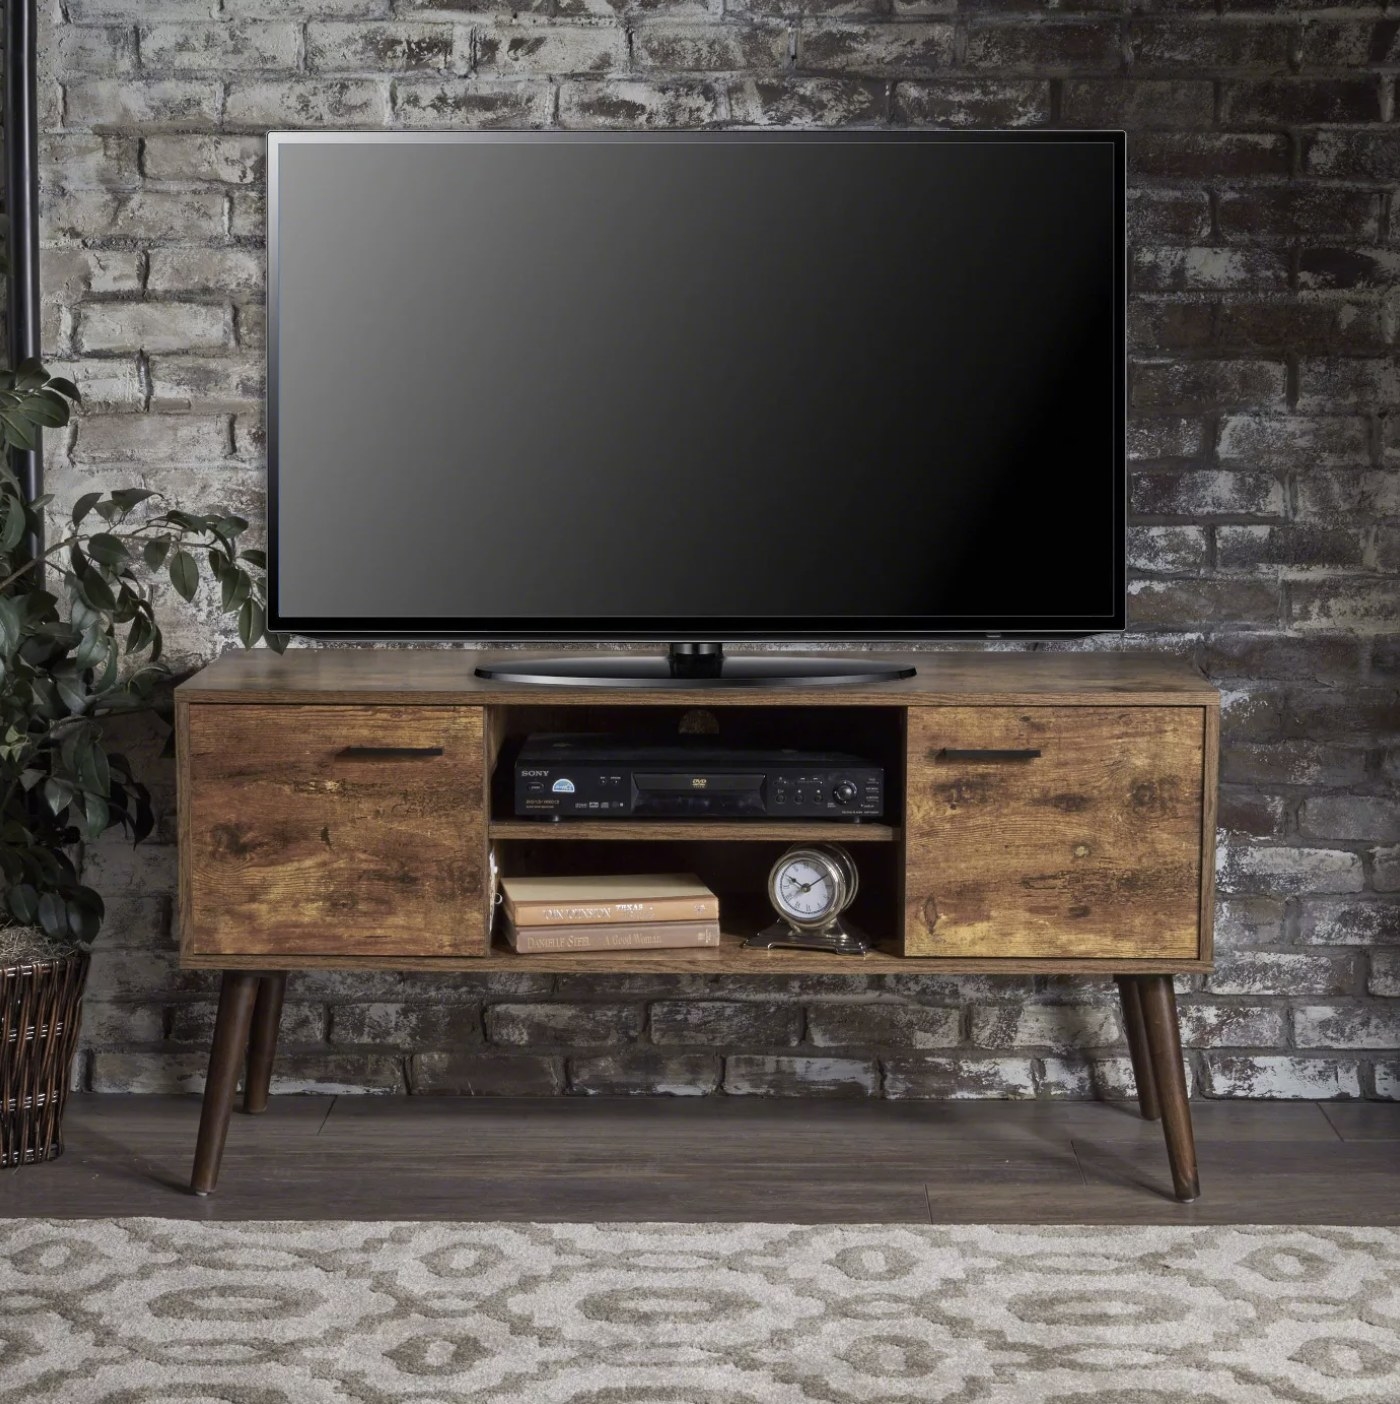 The wood entertainment center with a TV on top